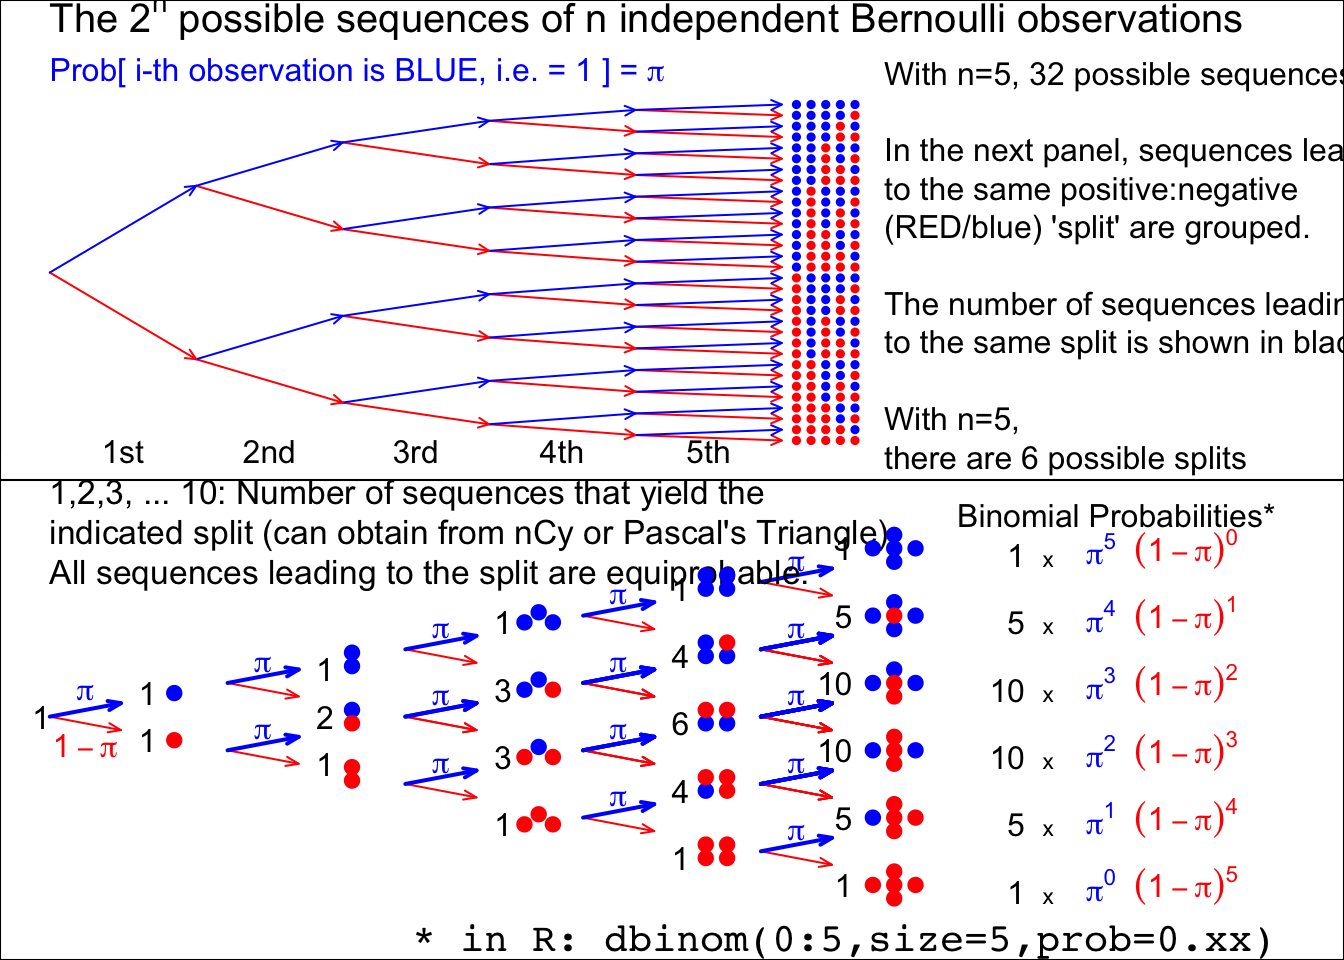 From 5 (independent and identically distributed) Bernoulli observations to Binomial(n=5), with the Bernoulli probability left unspecified. There are 2 to the power n possible (distinct) sequences of 0's and 1's, each with its probability. We are not interested in these 2 to the power n probabilities, but in the probability that the sample  contains y 1's and (n-y) 0's. There are only (n+1) possibilities for y, namely 0 to n. Fortunately, each of the n.choose.y sequences that lead to the same sum or count y, has the same probability. So we group the 2.to.power.n sequences into (n+1) sets, according to the sum or count. Each sequence in the set with  y 1's and (n-y) 0's has the same probability, namely  the prob.to.the.power.y times (1-prob).to.the.power.(n-y). Thus, in lieu of adding all such probabilities, we simply multiply this  probability by the number, n.choose-y -- shown in black -- of unique sequences in the set. Check: the frequencies in black add to 2.to.power.n. Nowadays, the (n+1) probabilities are easily obtained by supplying a value for the 'prob' argument in the R function dbinom(), instead of  computing the binomial coefficient n.choose-y by hand.